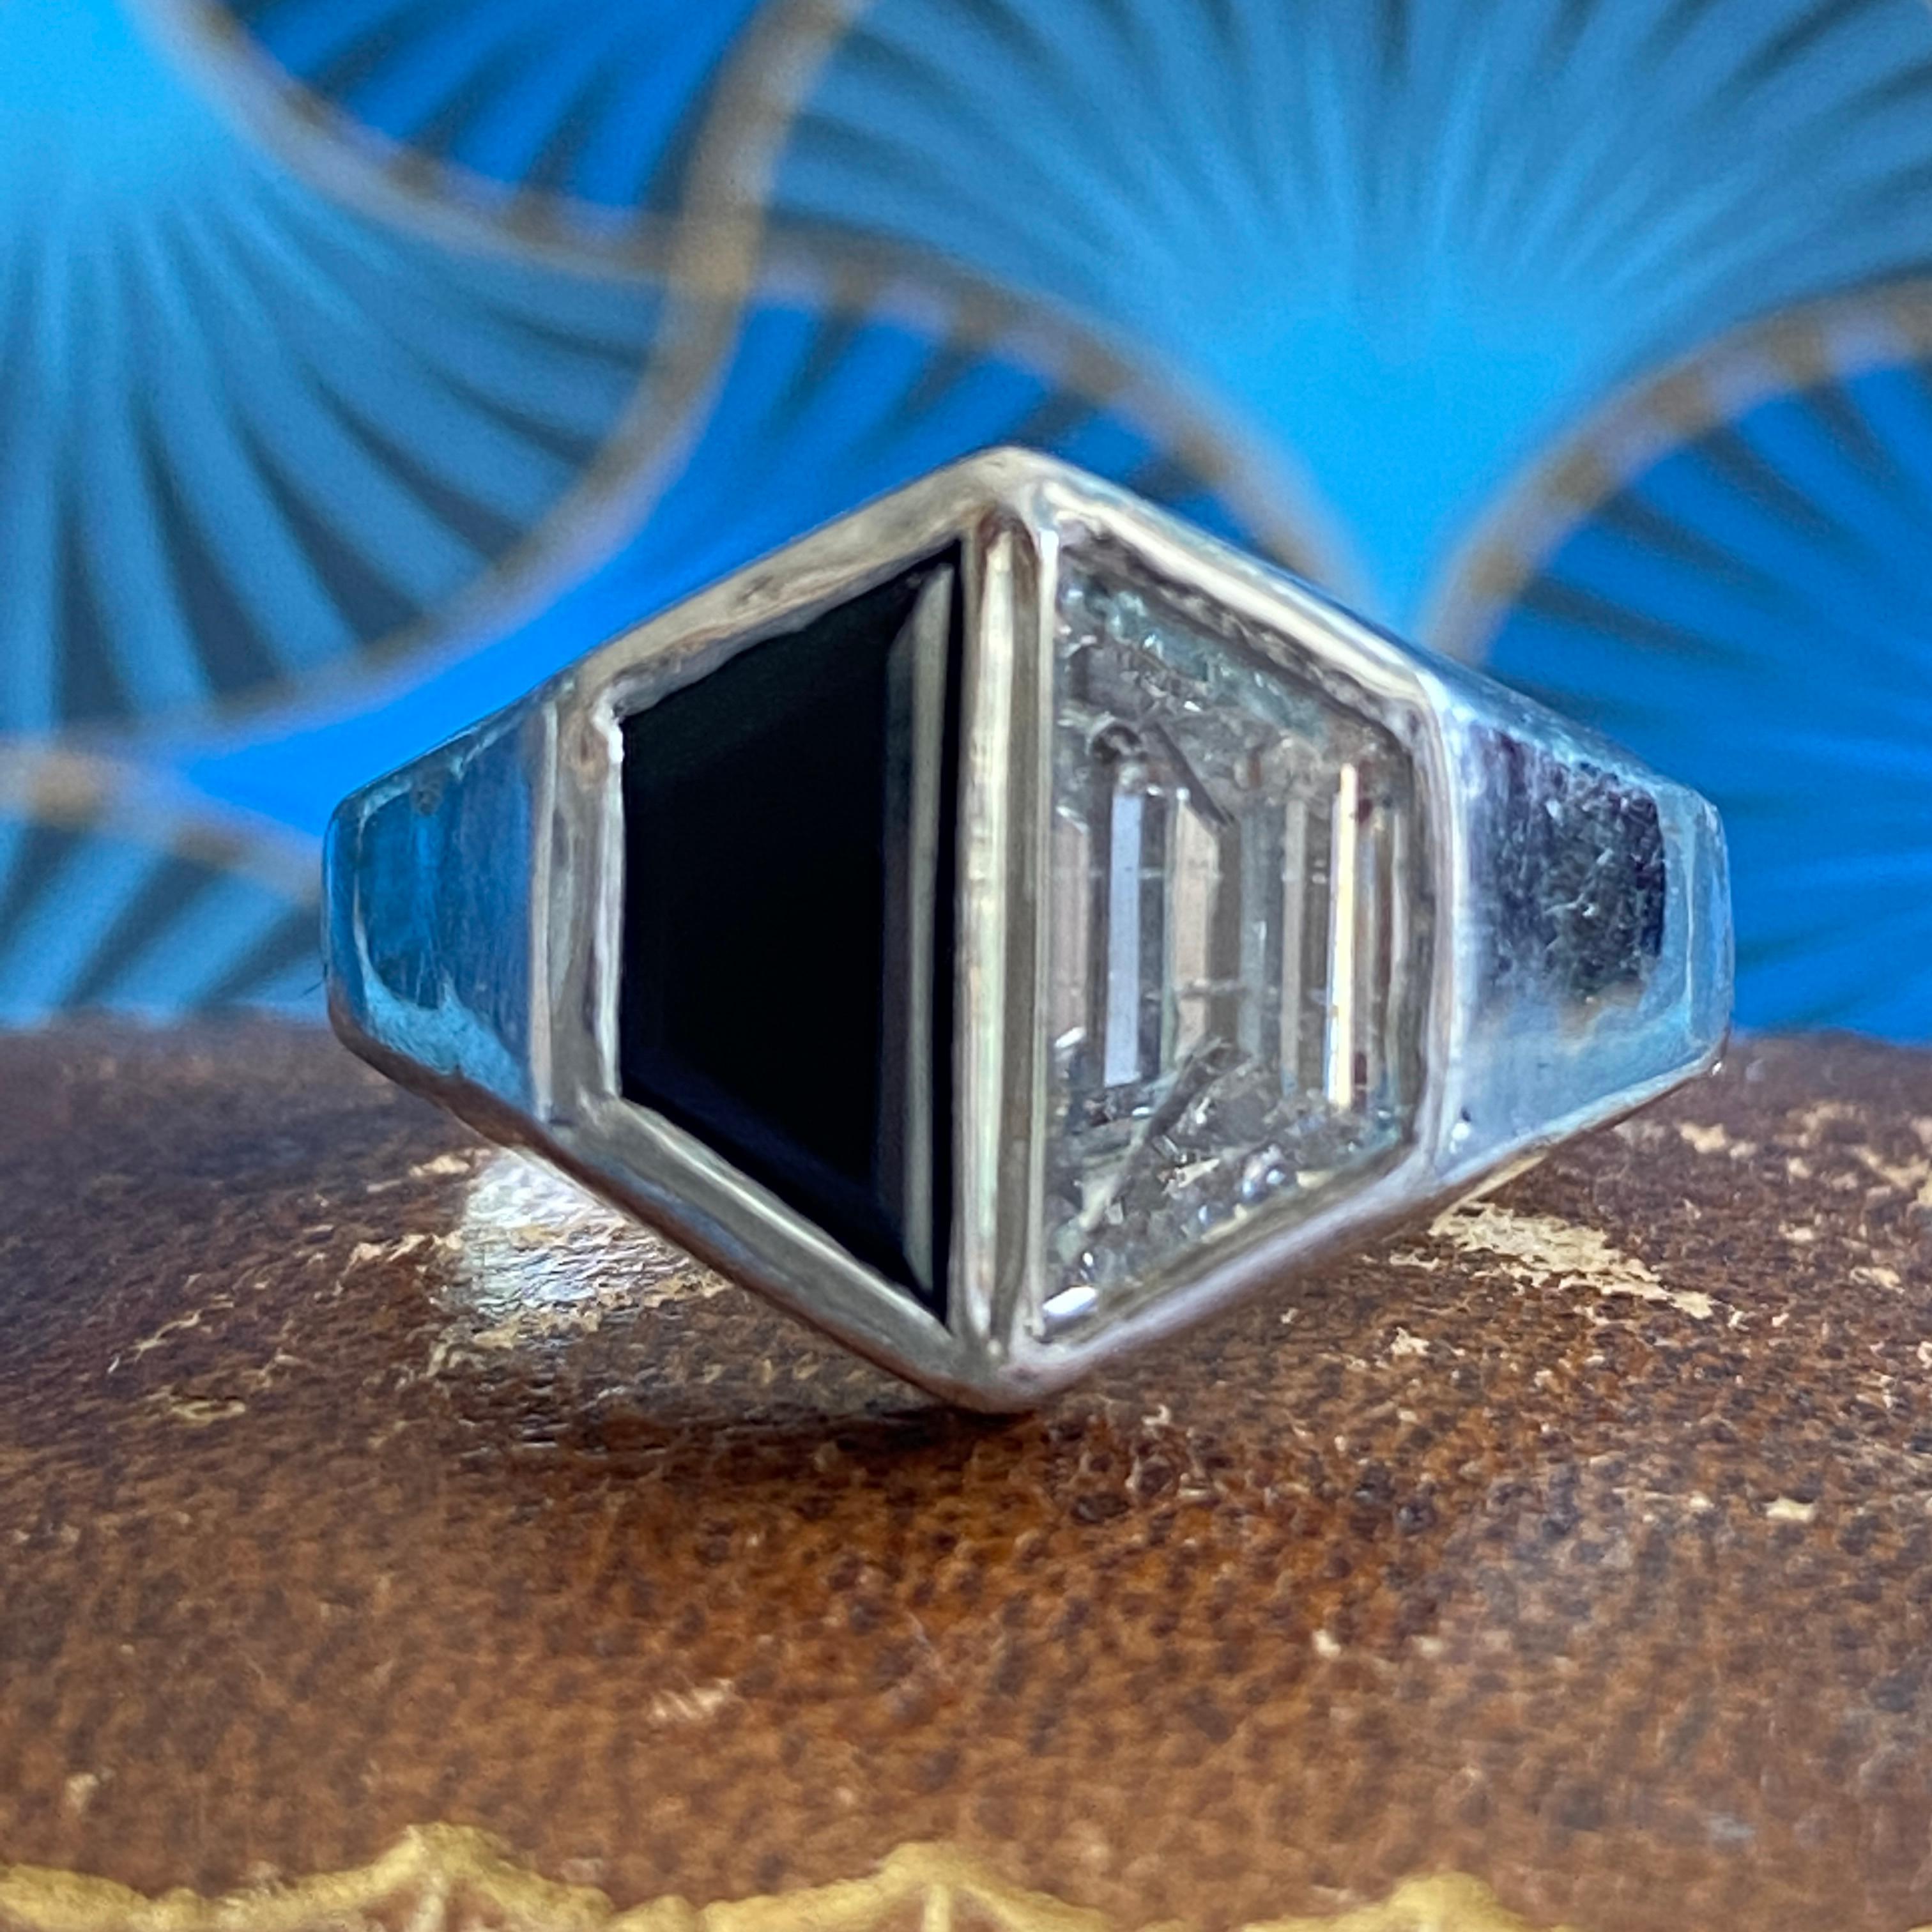 Details:
Stunning vintage 18K white gold, onyx and diamond ring—would make a lovely wedding ring! The diamond is estimated 1.27 carats, and matches with the onyx. The setting is beautiful on this ring, and is in lovely shape. This is a stunning